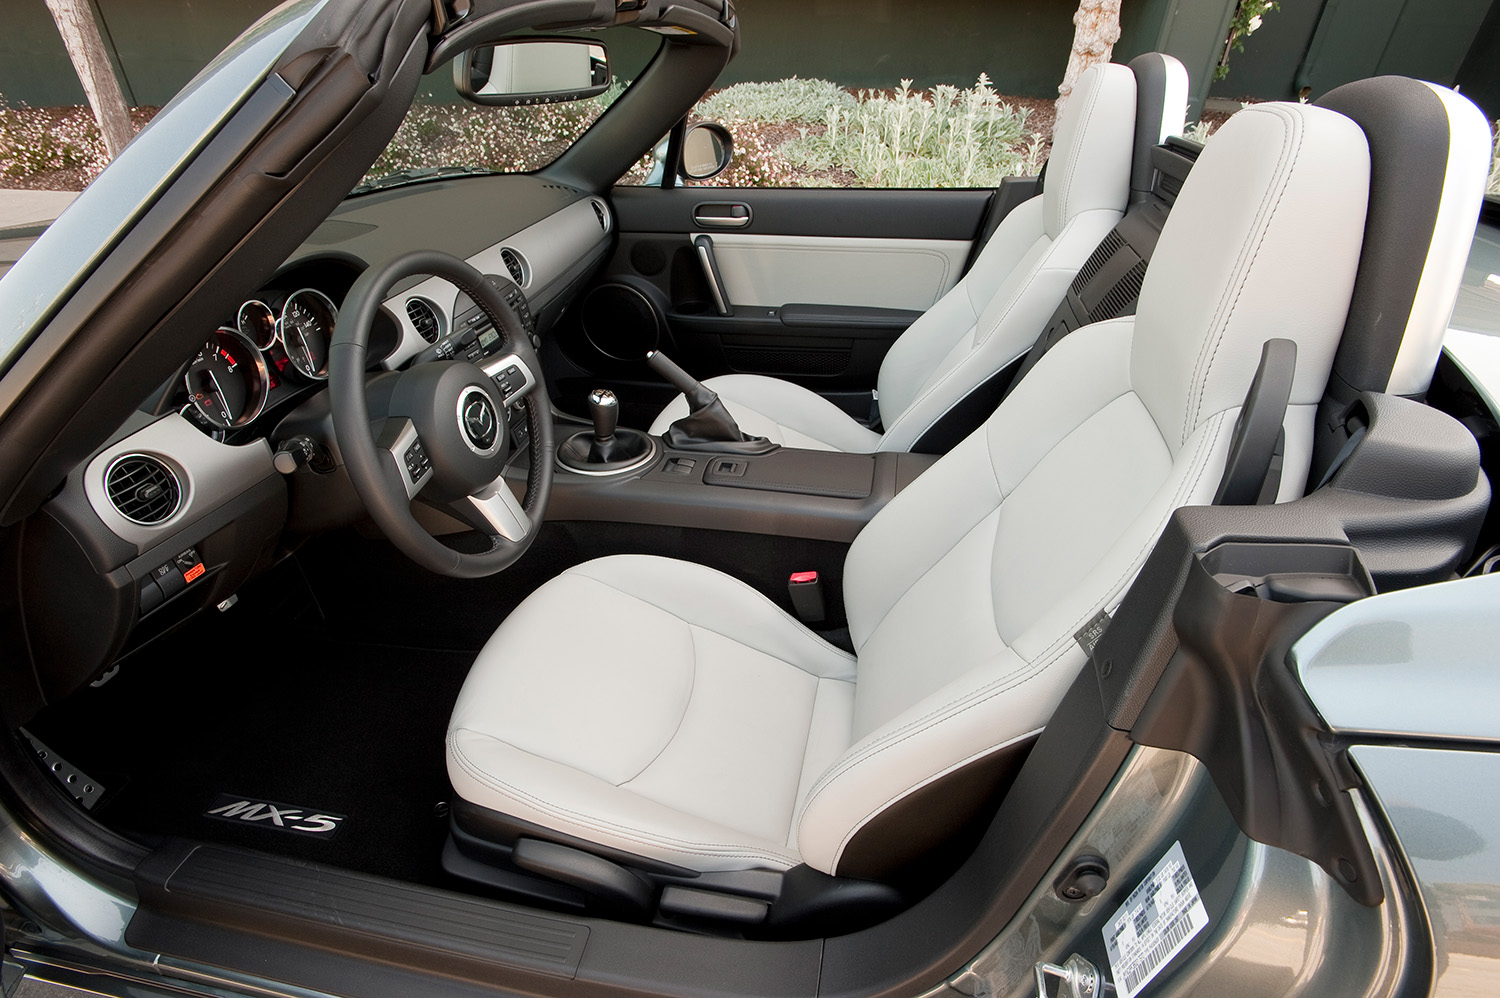 White Interior of 2012 NC Mazda MX-5  Mazda Miata the highest rated used affordable sports car from consumer reports